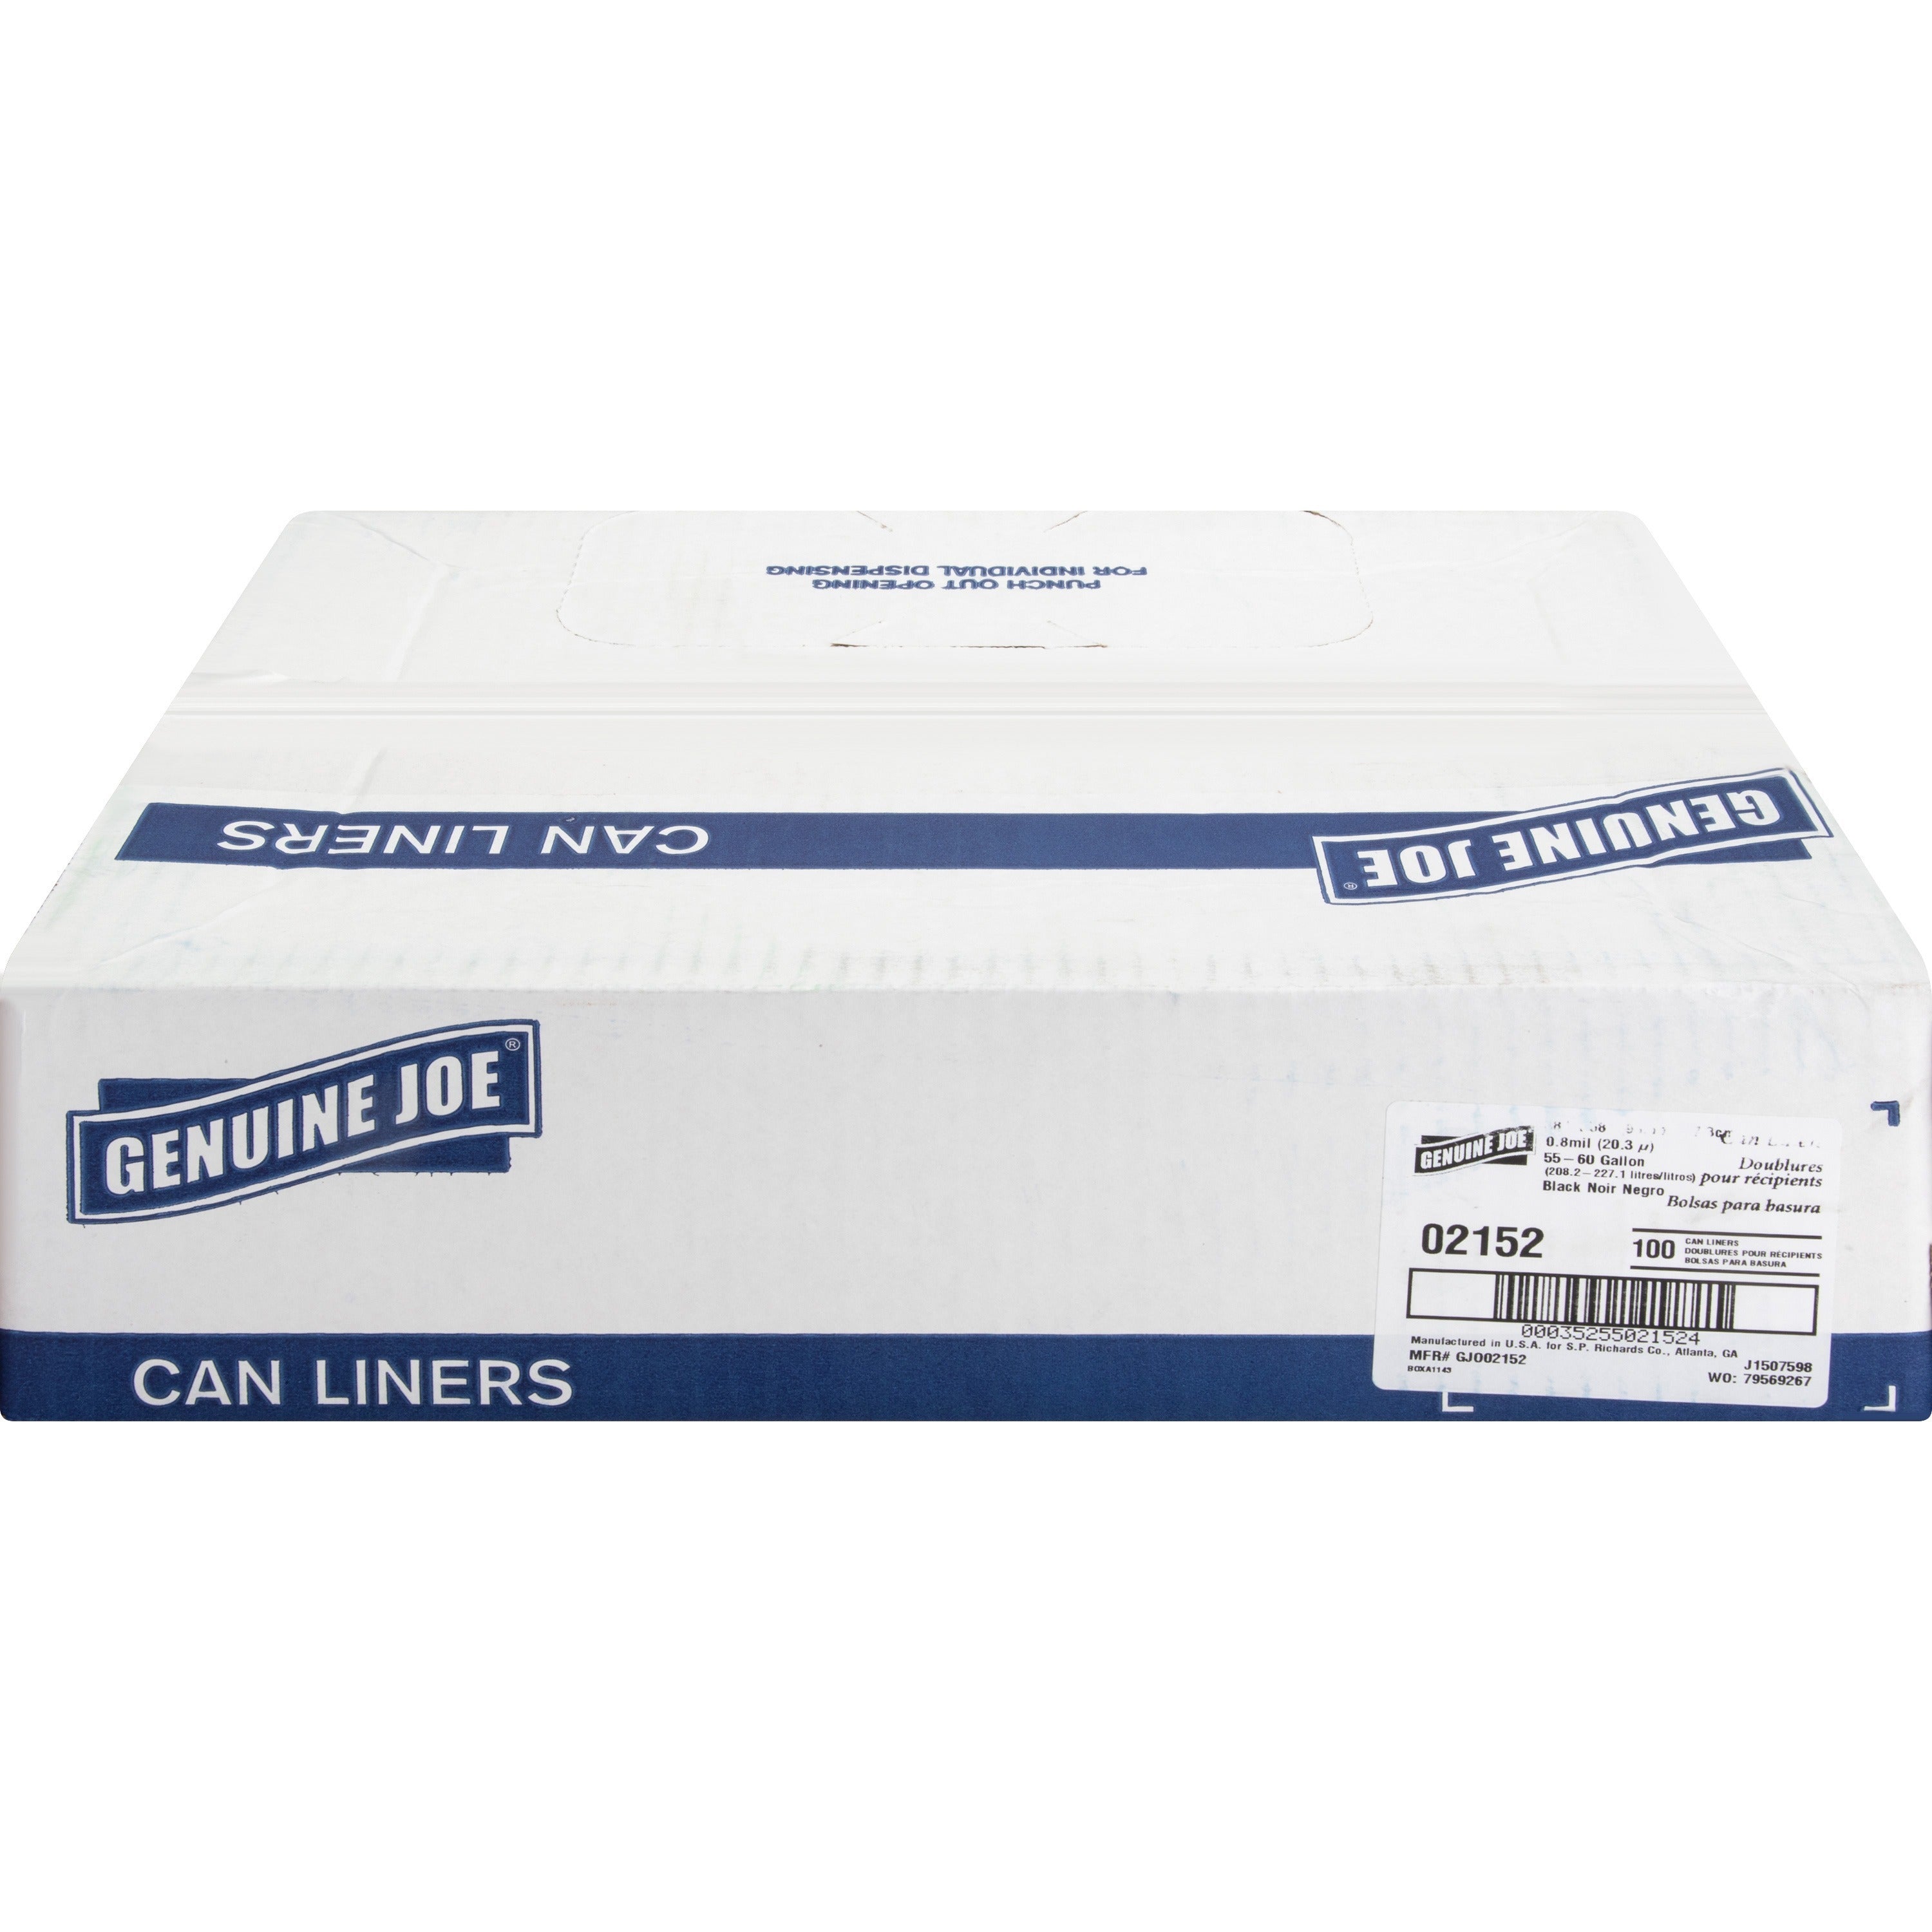 Genuine Joe Linear Low Density Can Liners - Extra Large Size - 60 gal Capacity - 38" Width x 58" Length - 0.80 mil (20 Micron) Thickness - Low Density - Brown, Black - 100/Carton - 